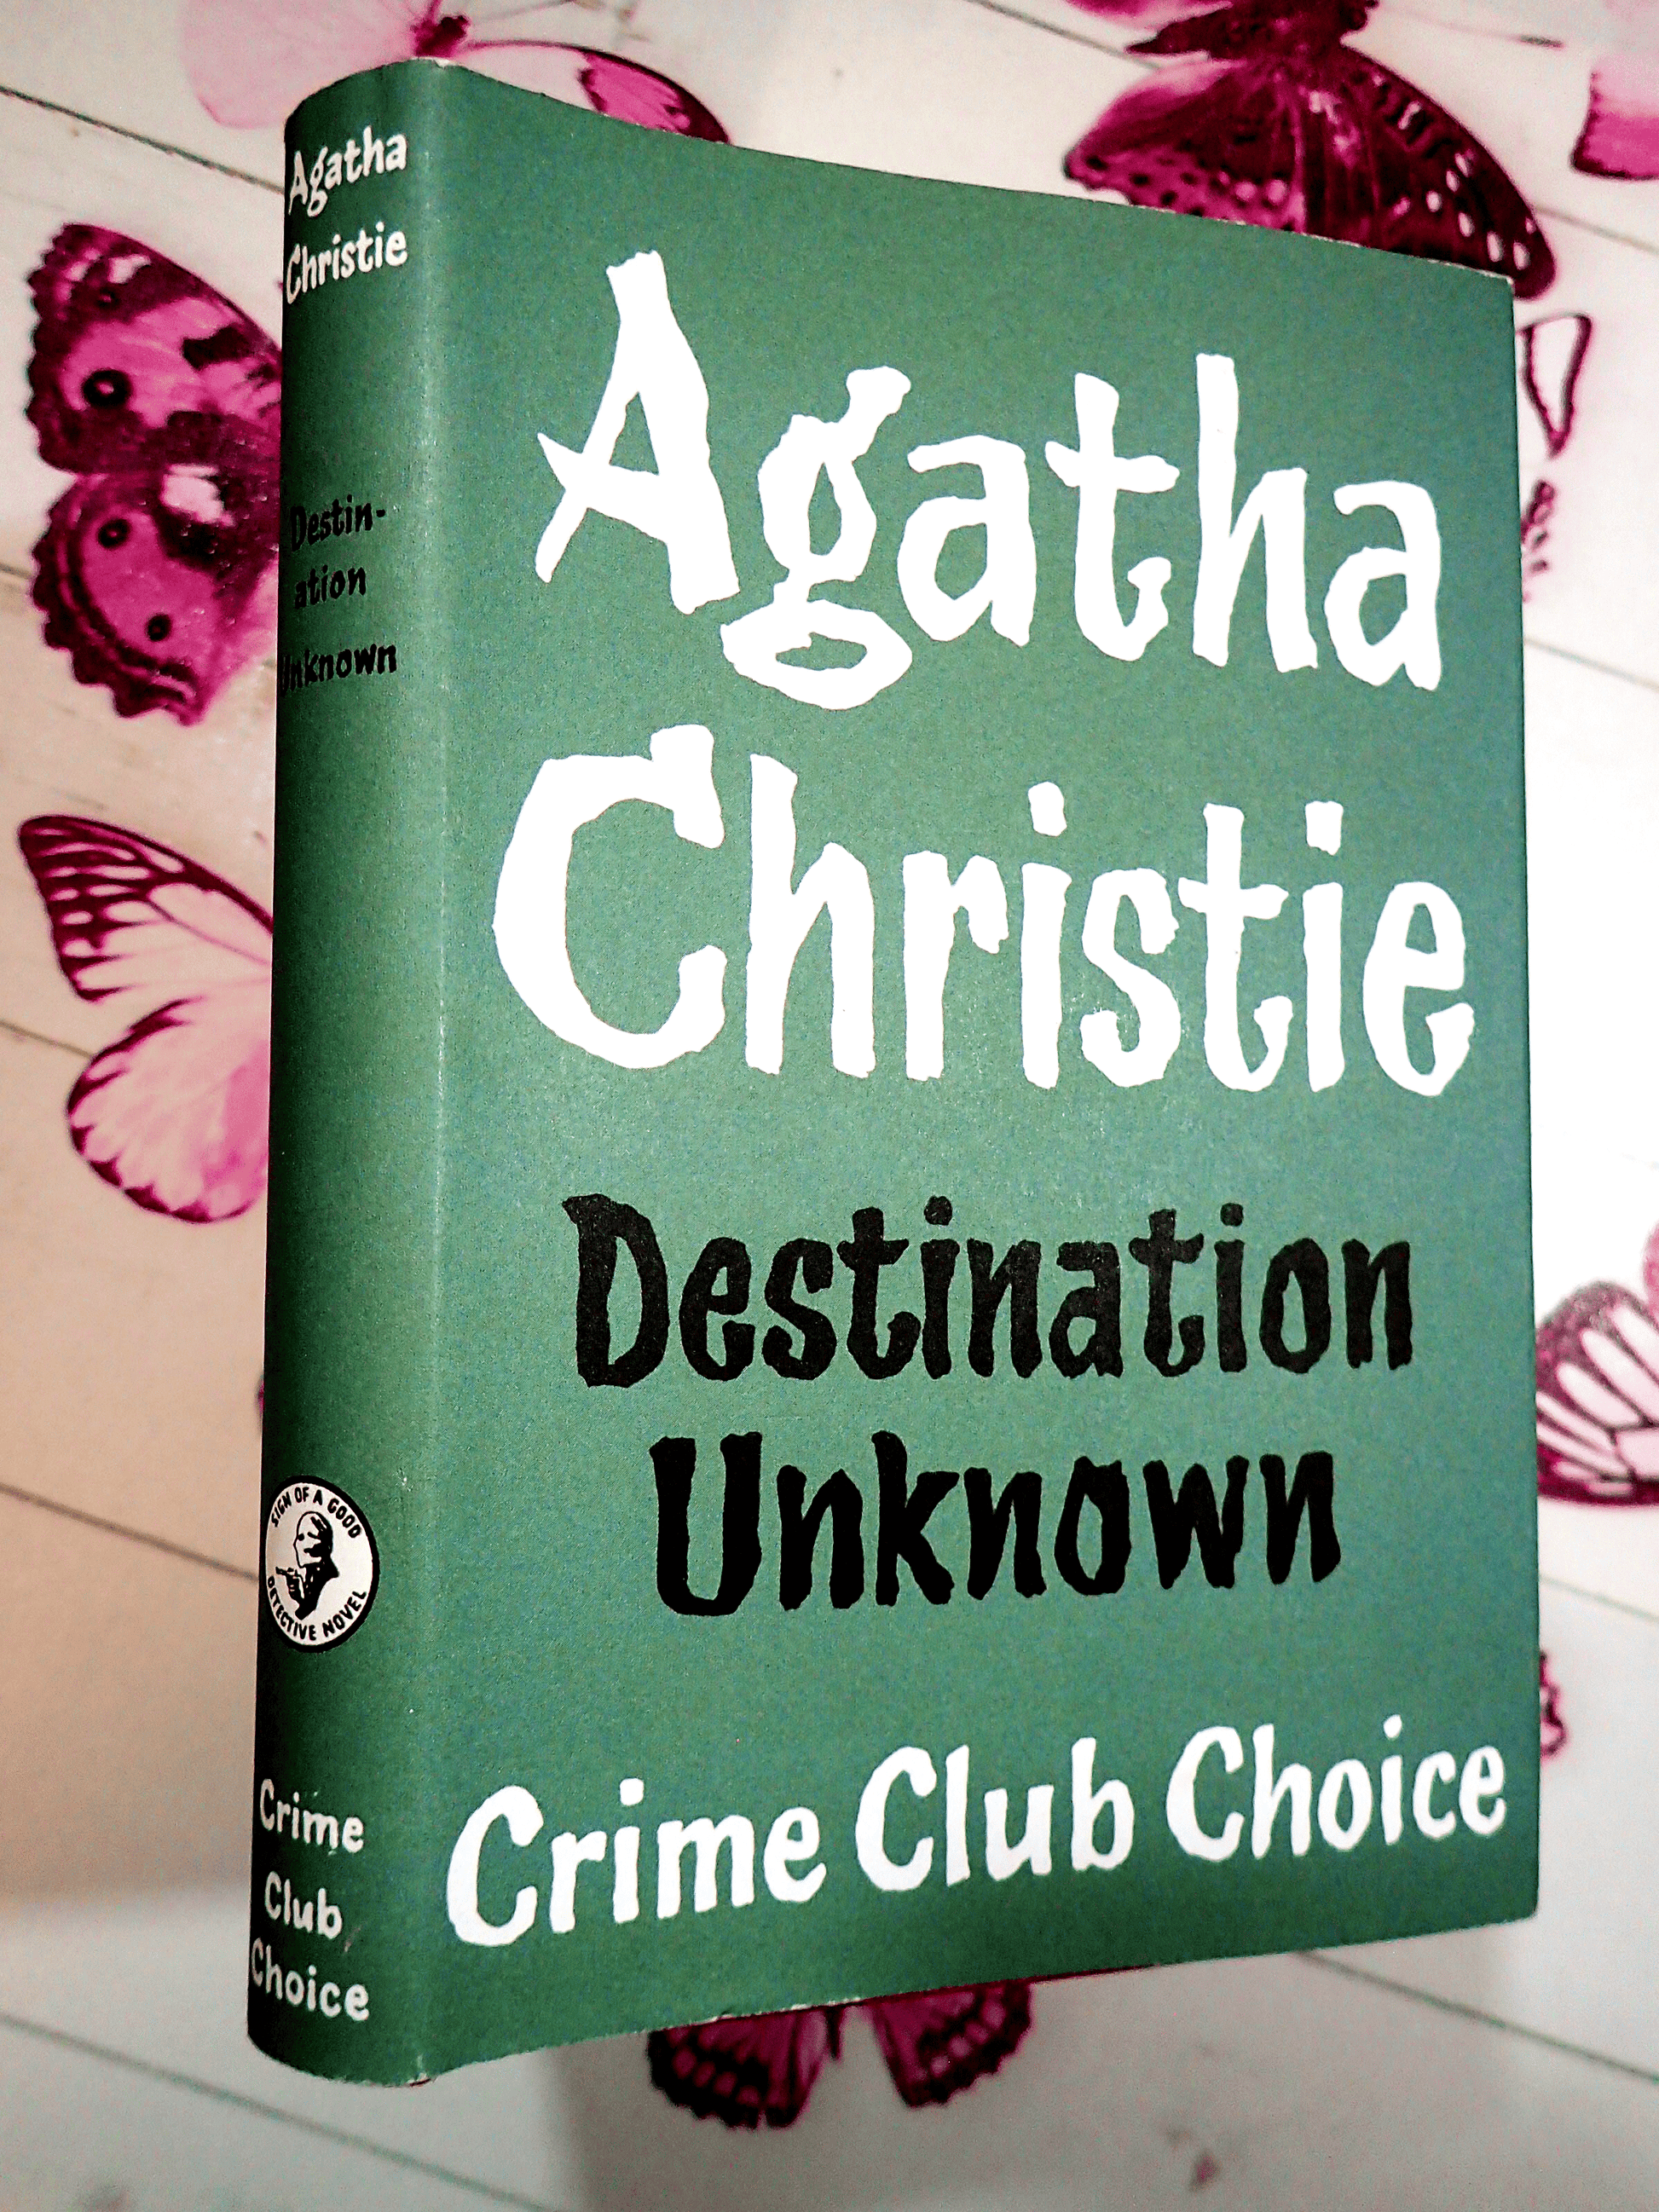 Destination Unknown Agatha Christie Hardback Facsimile Vintage book front cover showing black and white titles against grey green jacket. 